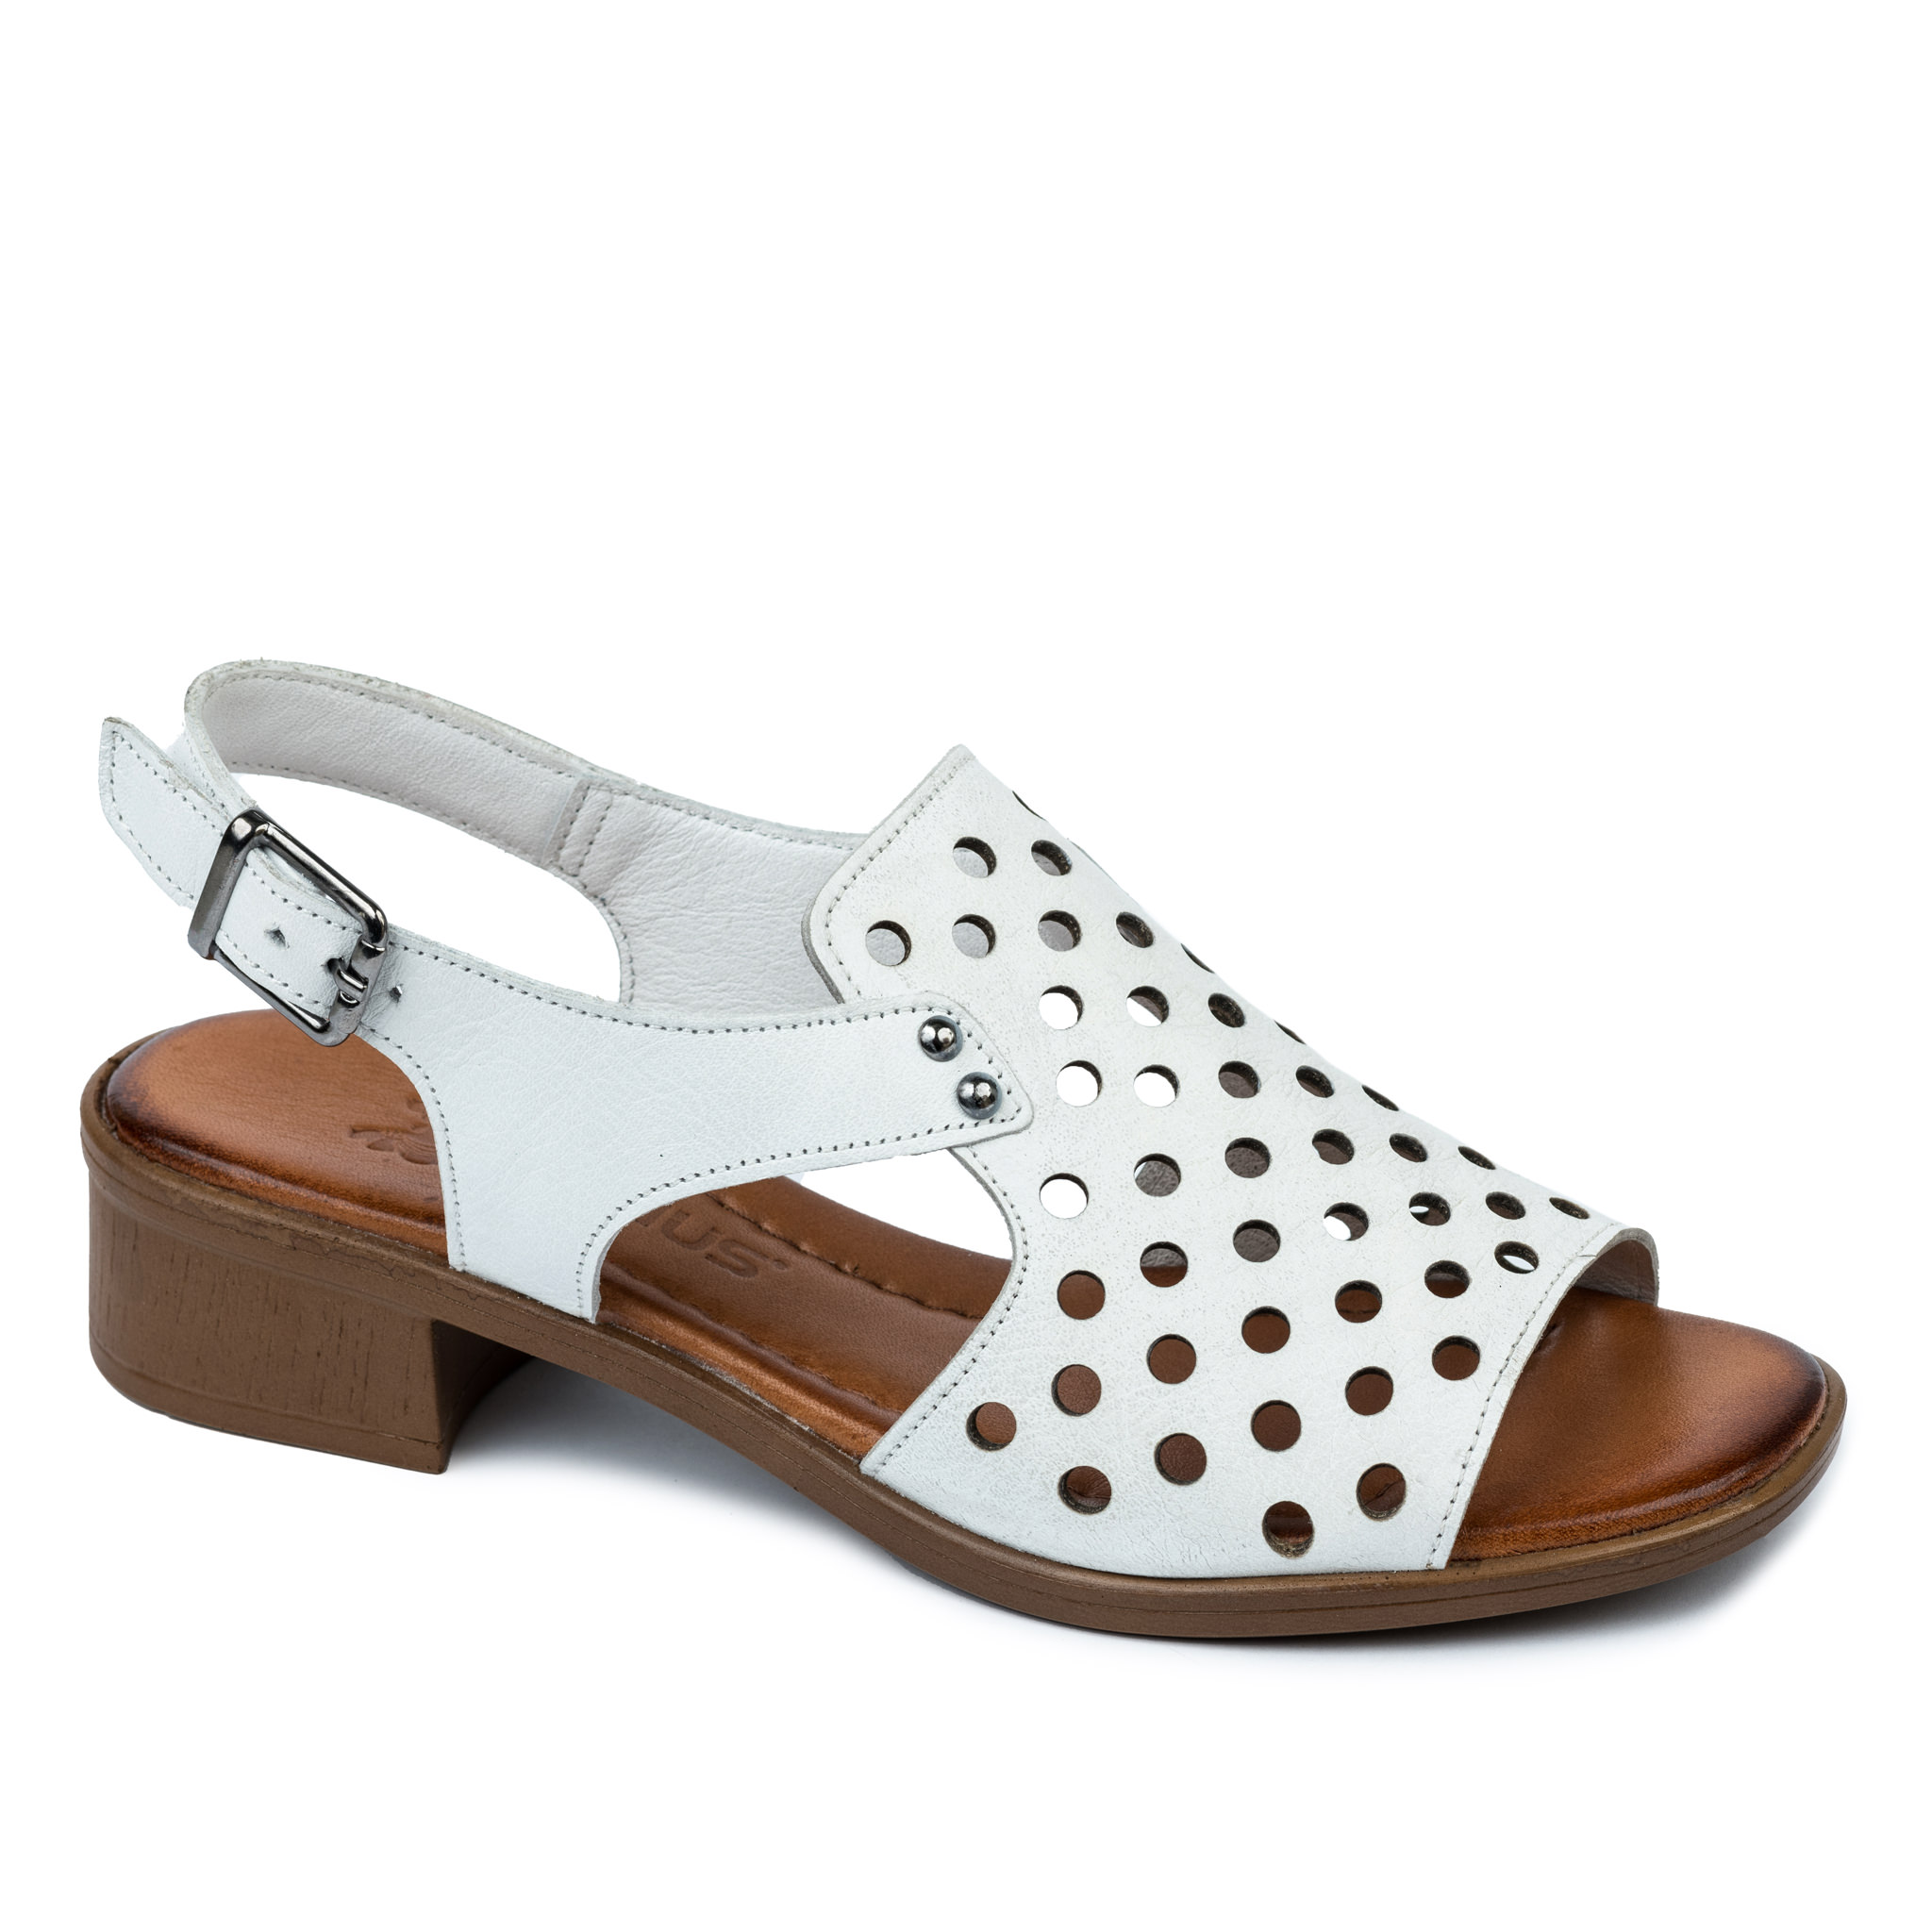 Leather sandals A473 - WHITE